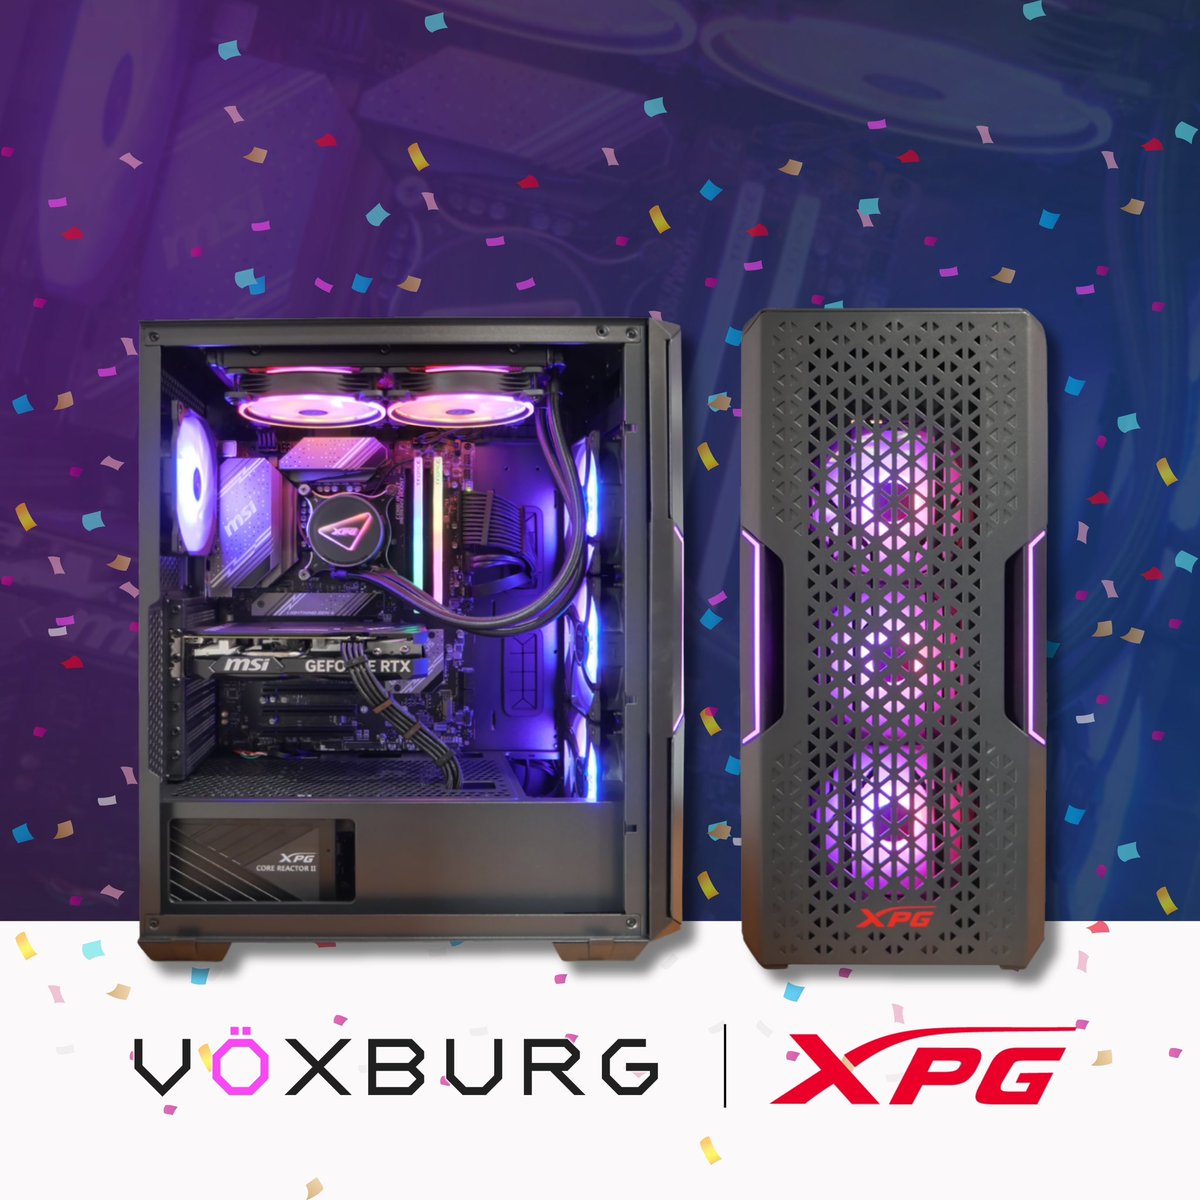 We are thrilled to announce that VÖXBURG has partnered with XPG! We will now be offering XPG products in all of our new builds, including cases, PSUs, AlOs, fans, and peripherals! XPG is releasing some awesome new product this year and we have a lot of new content planned! #xpg